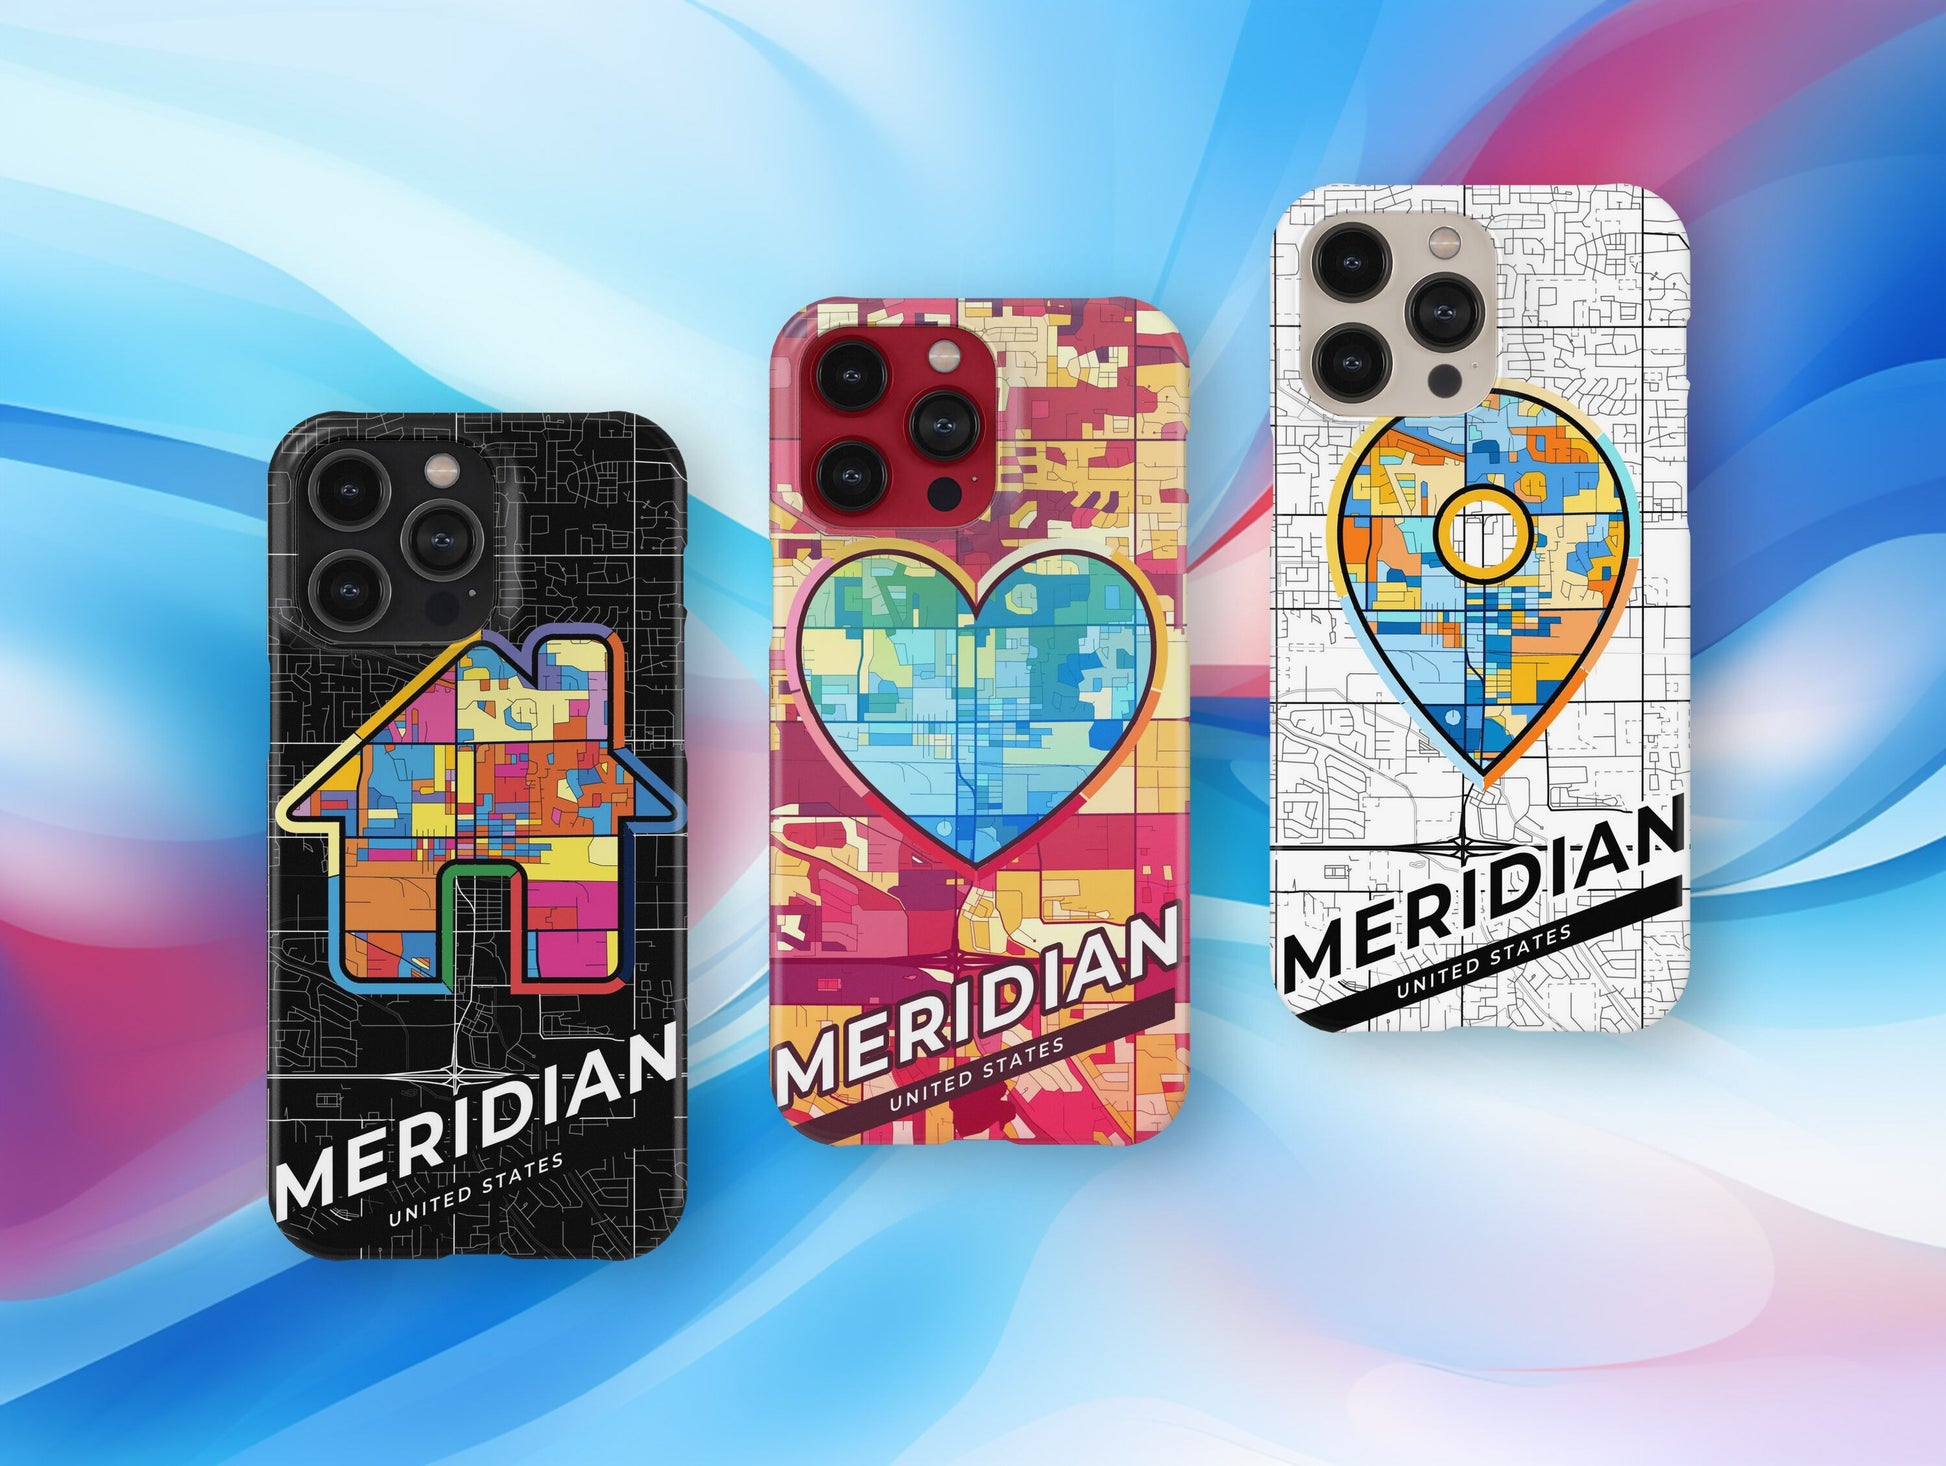 Meridian Idaho slim phone case with colorful icon